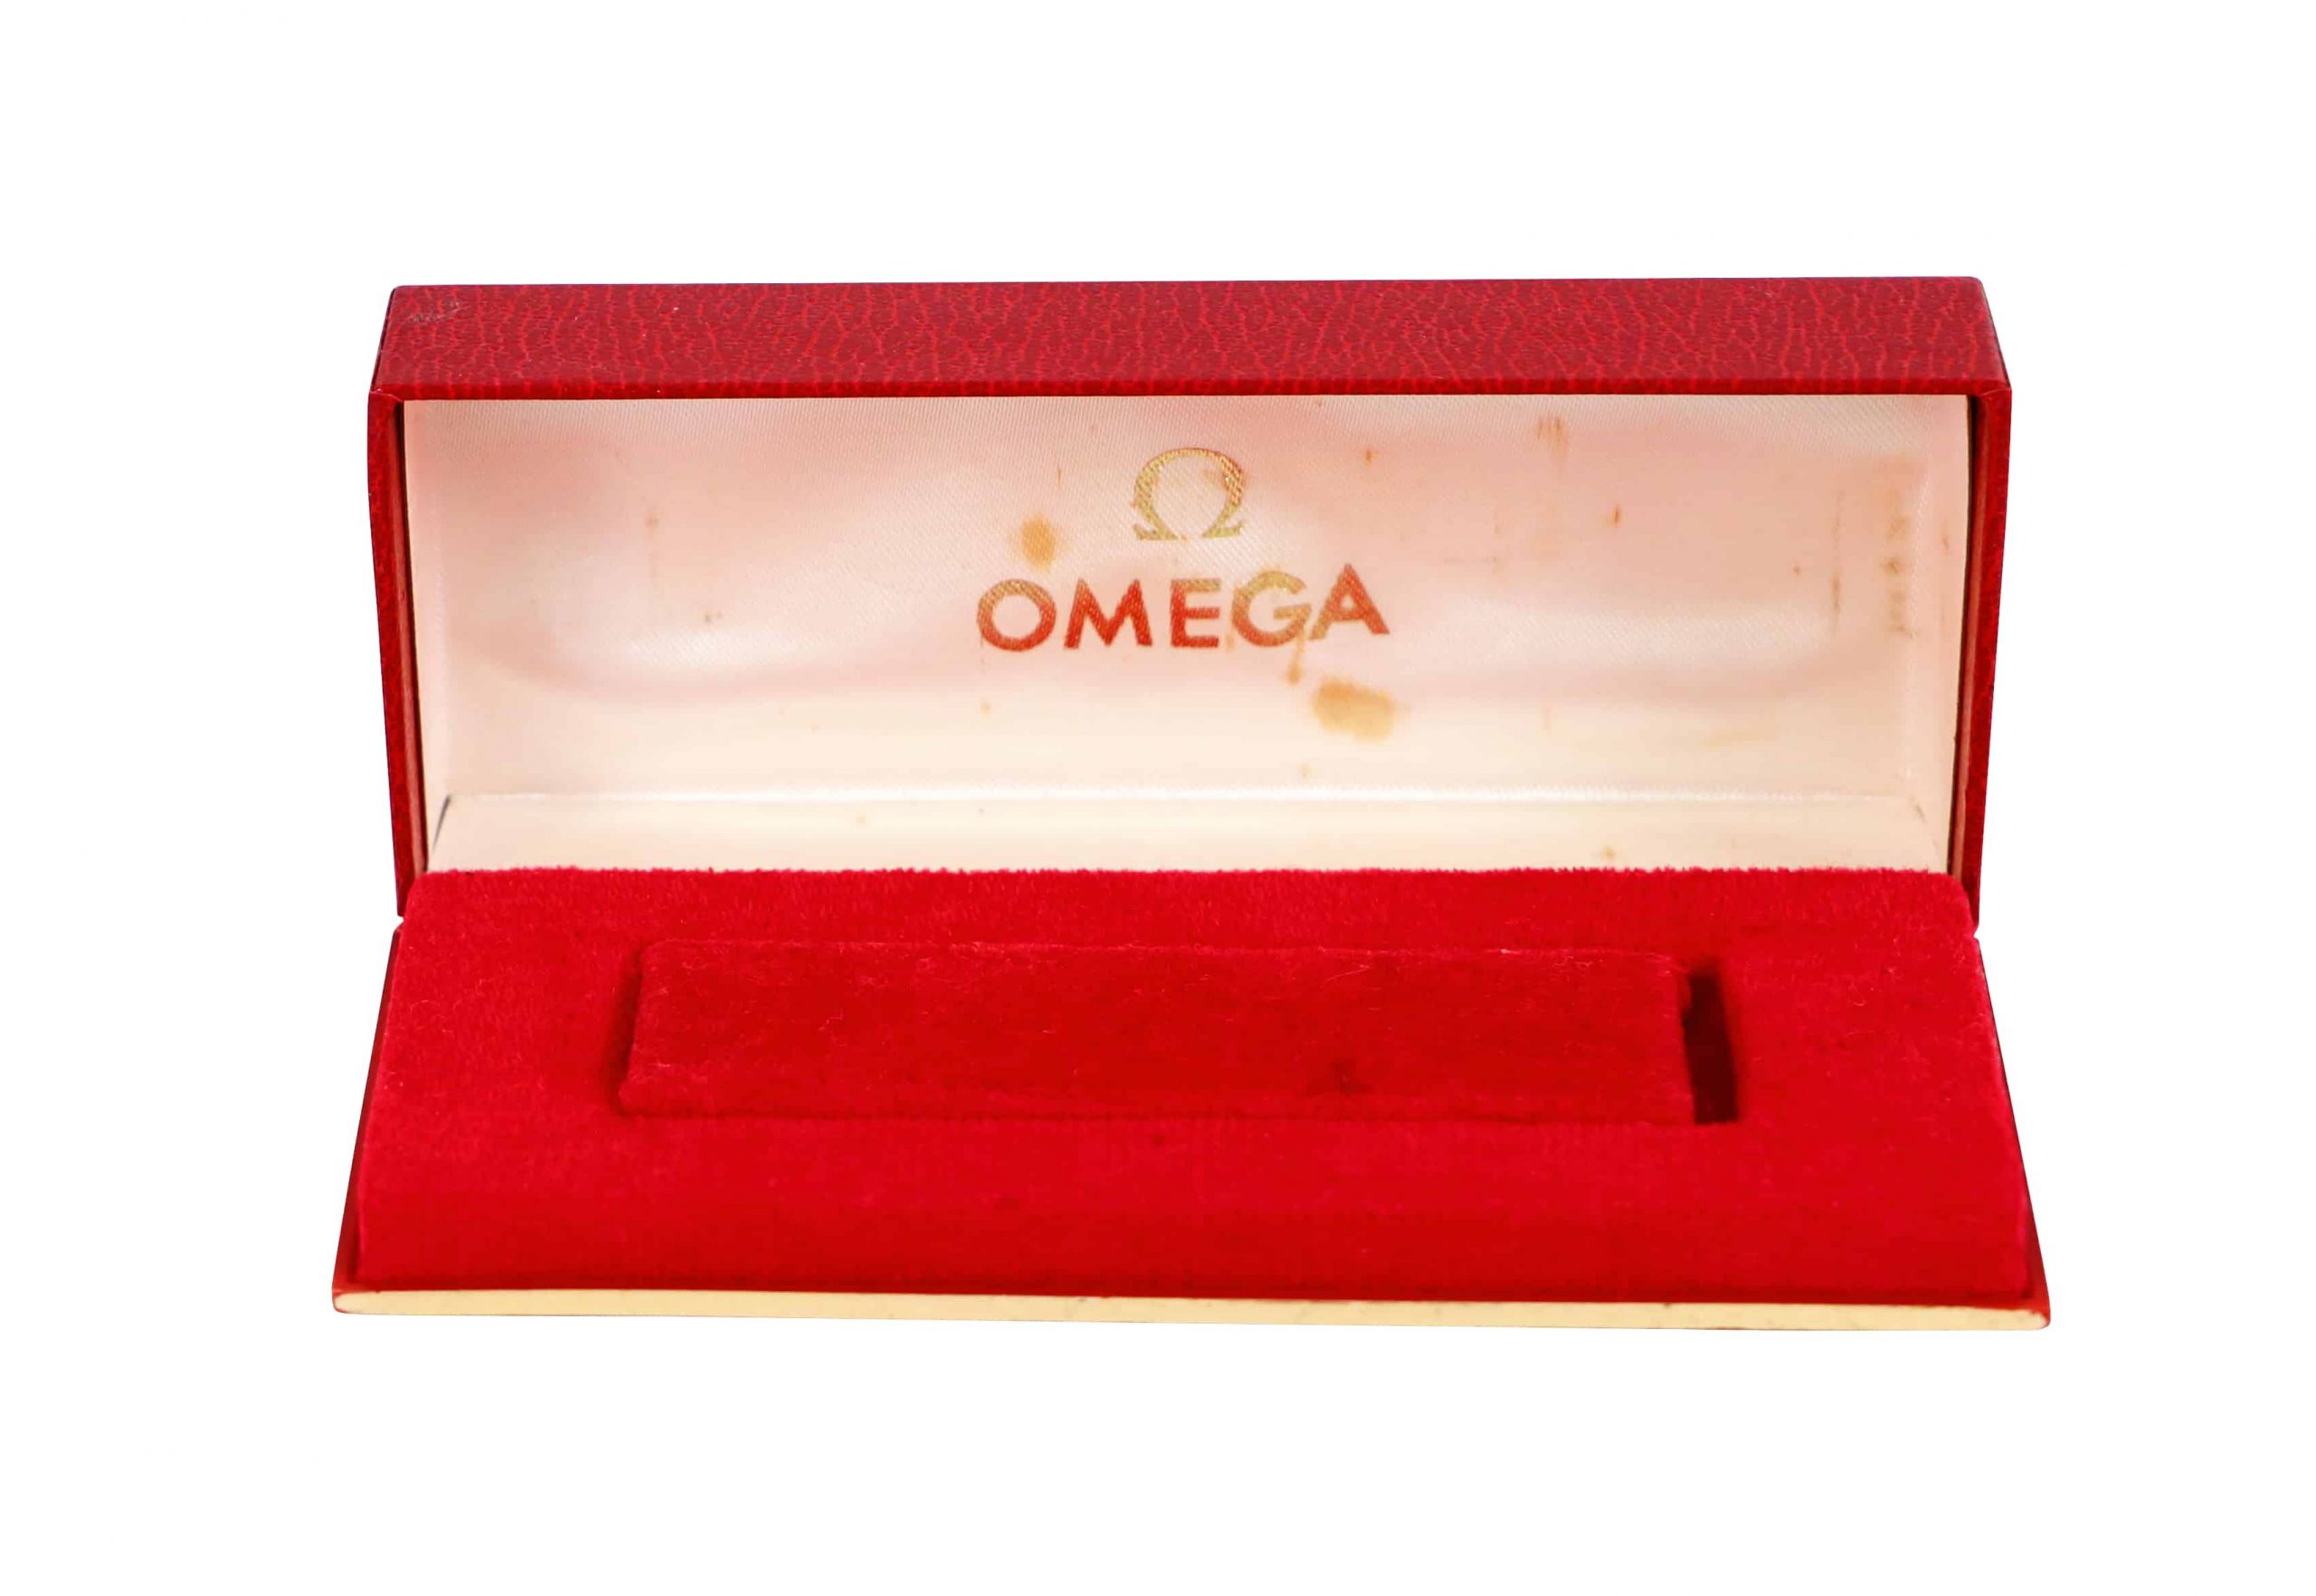 Omega Red Watch Box Vintage - Rare Watch Parts